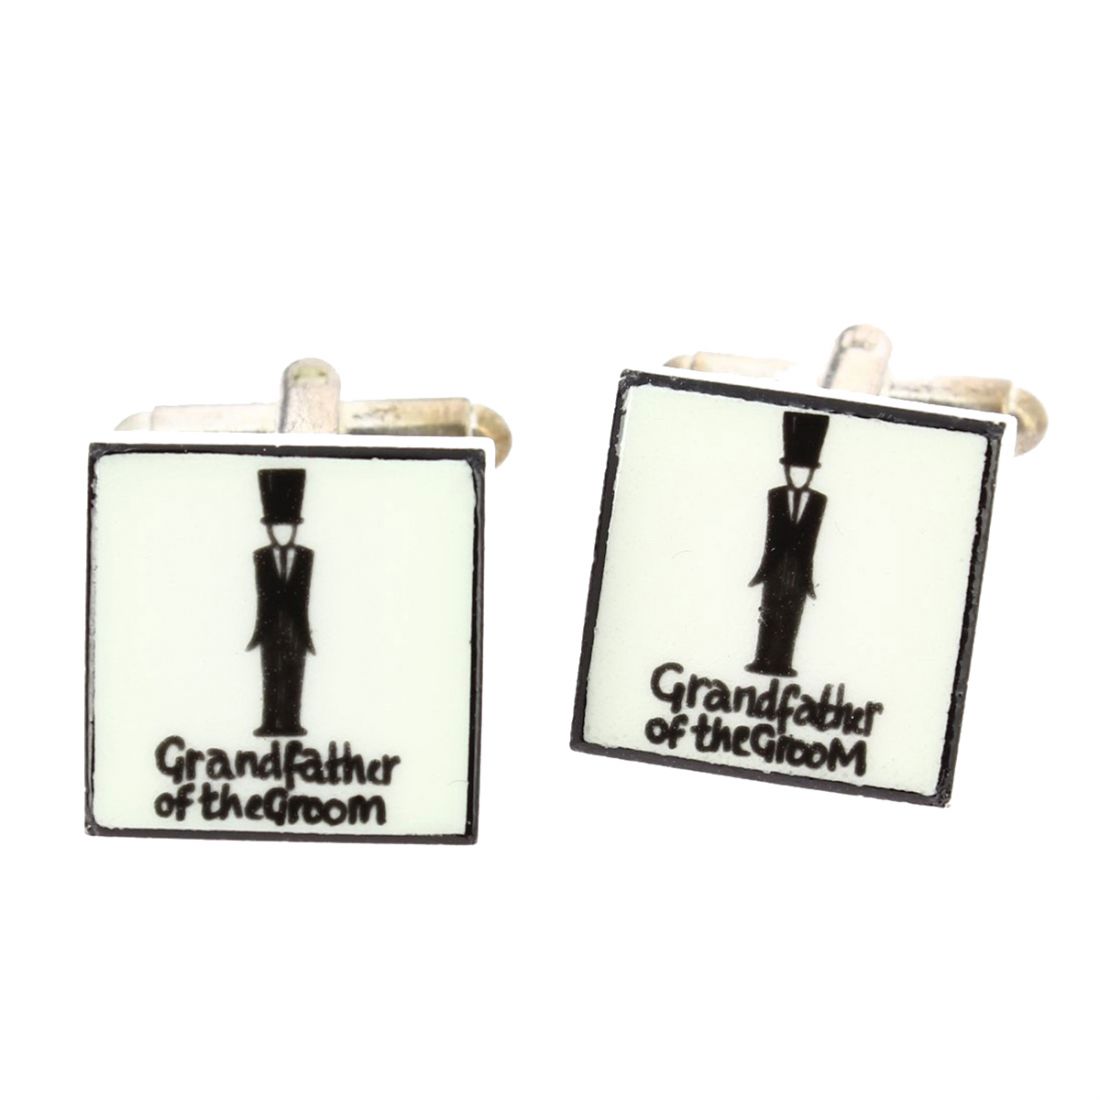 Boutons de manchette, Grandfather of the groom, Mariage un personnage Sonia Spencer